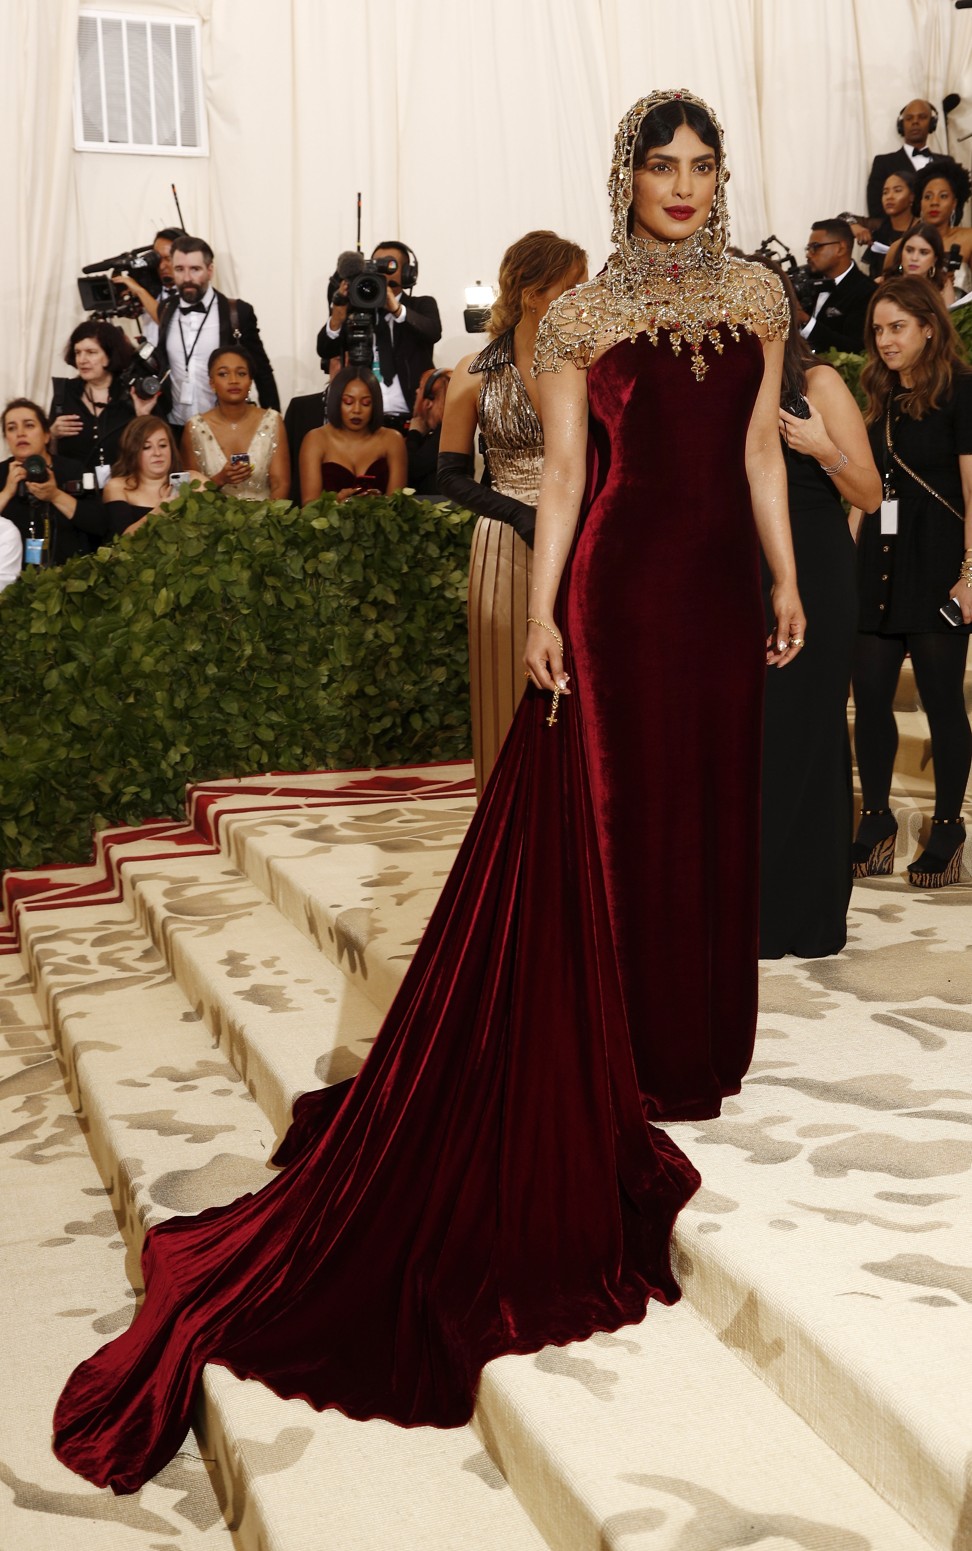 Gallery: the best and worst dressed at The Met Gala 2018 | South China ...